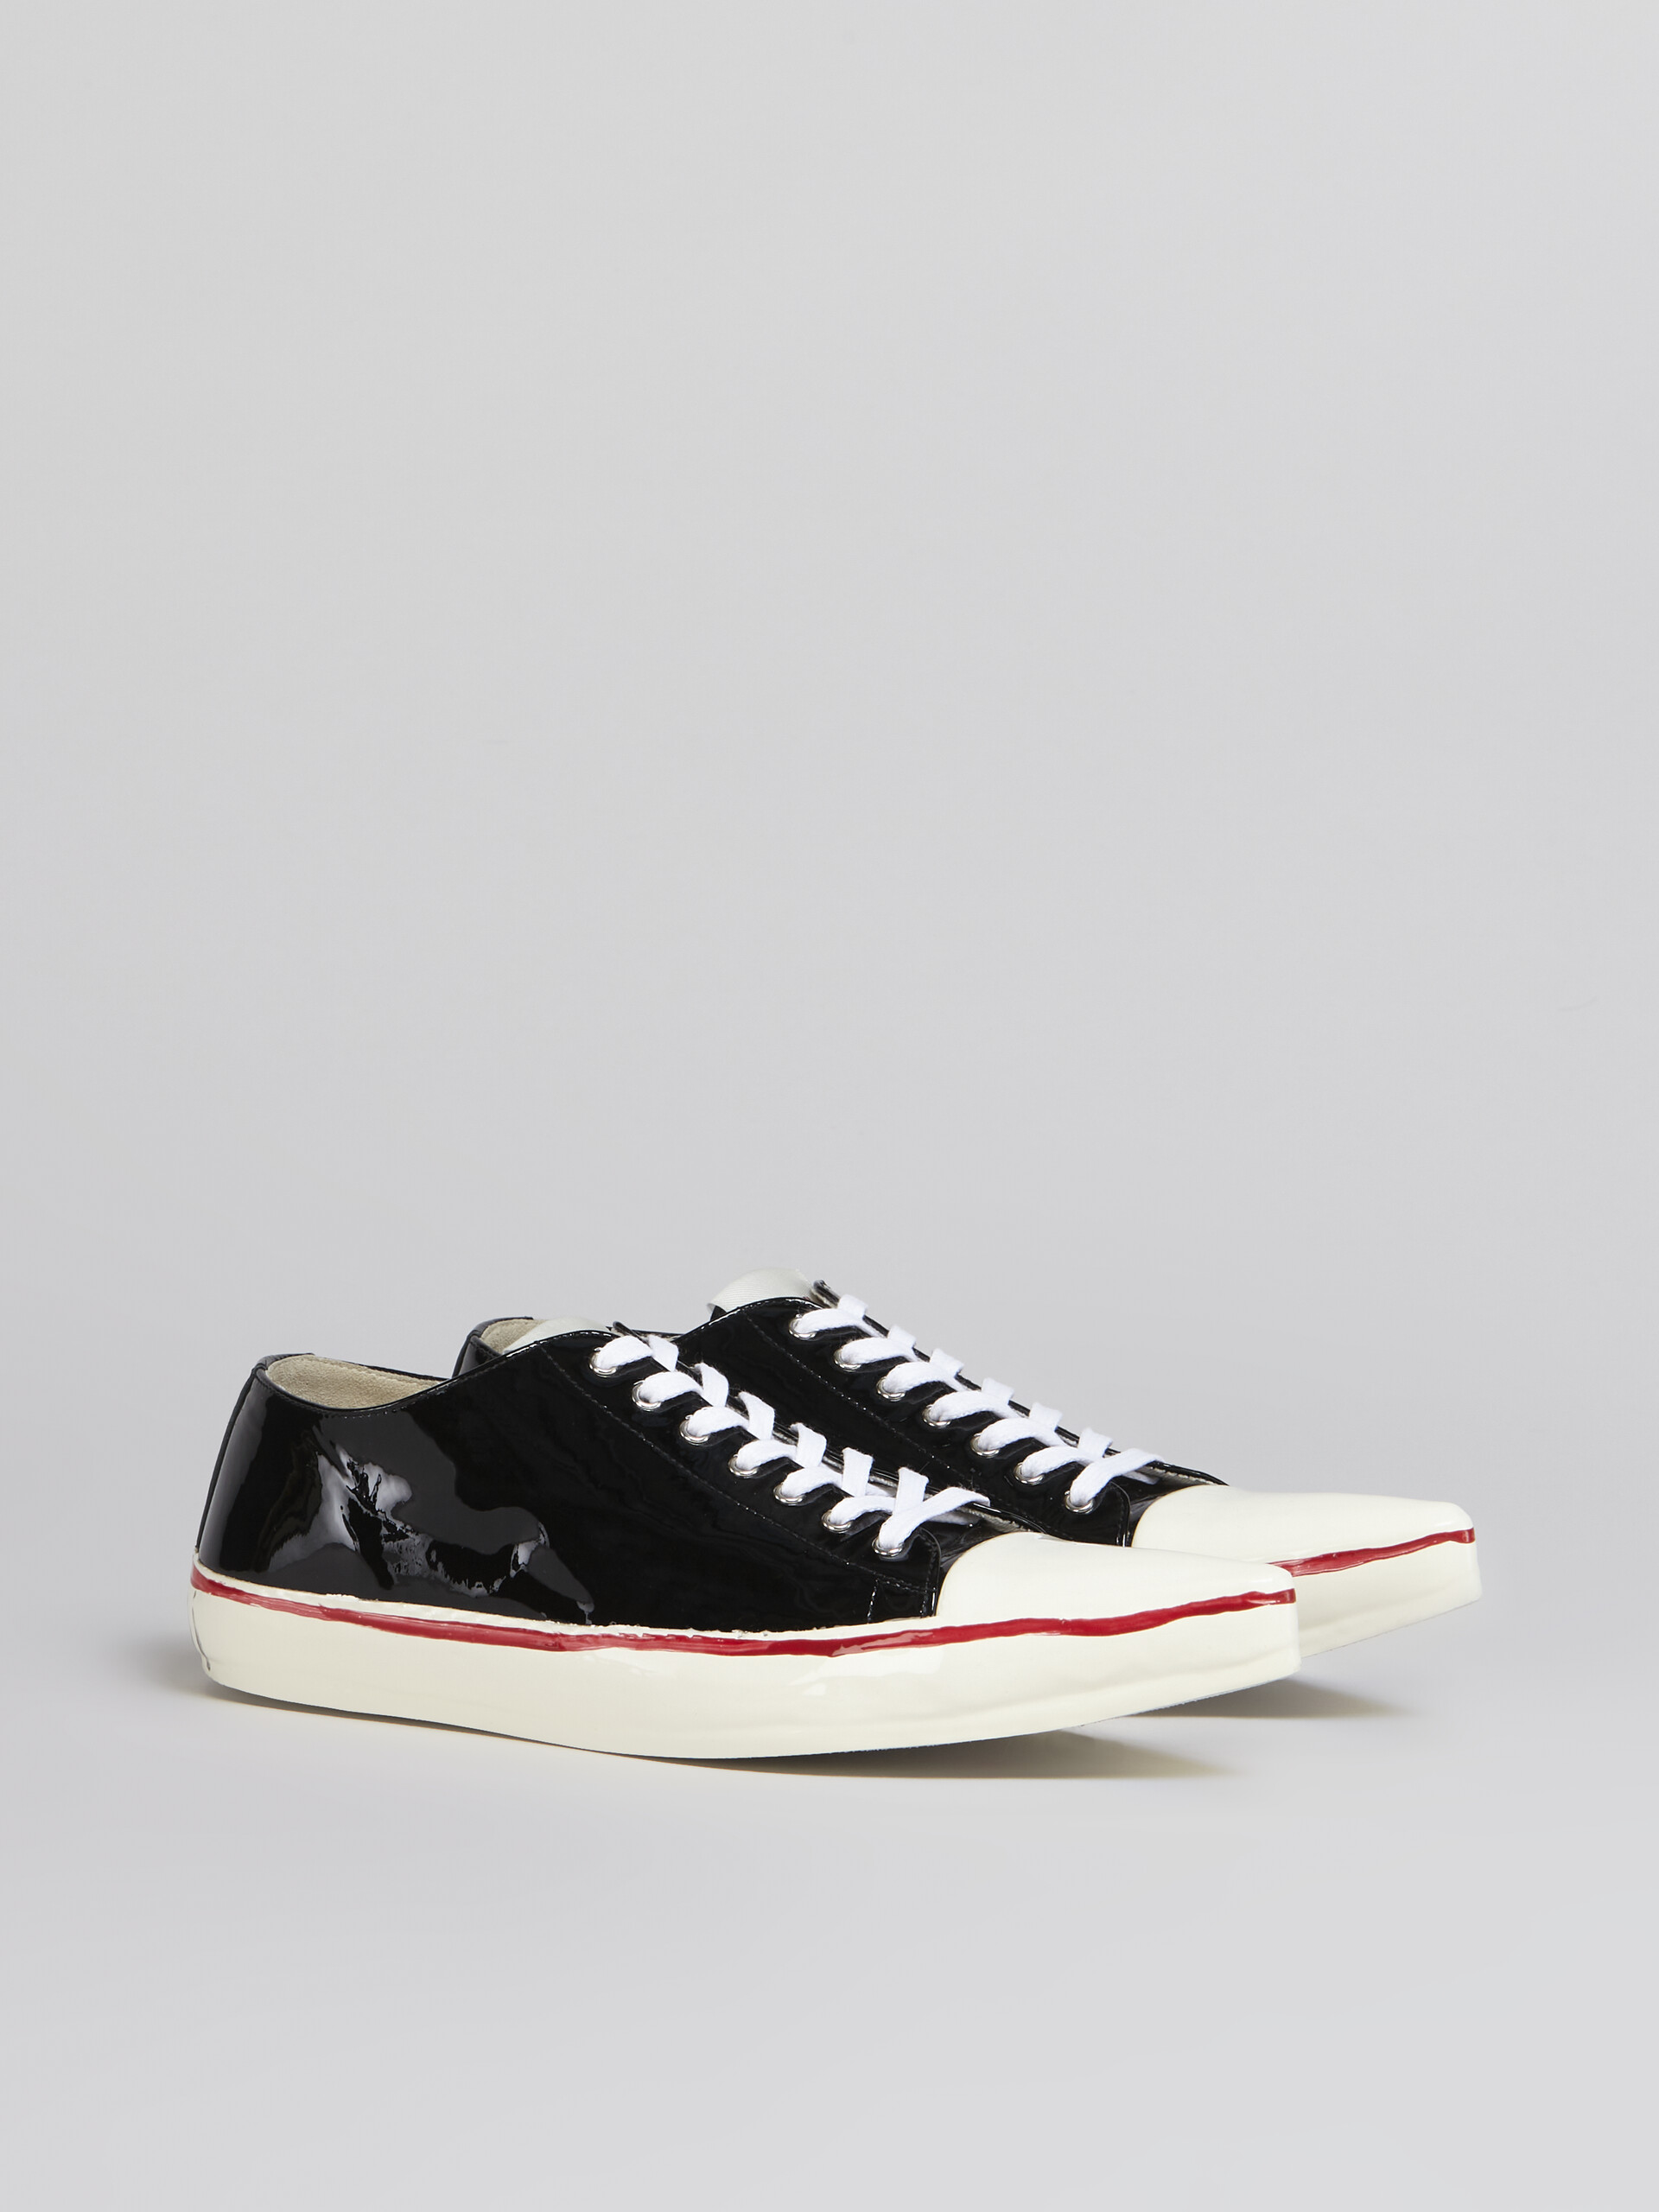 Patent leather GOOEY low-top sneaker w/Marni graffiti-style signature - Sneakers - Image 2